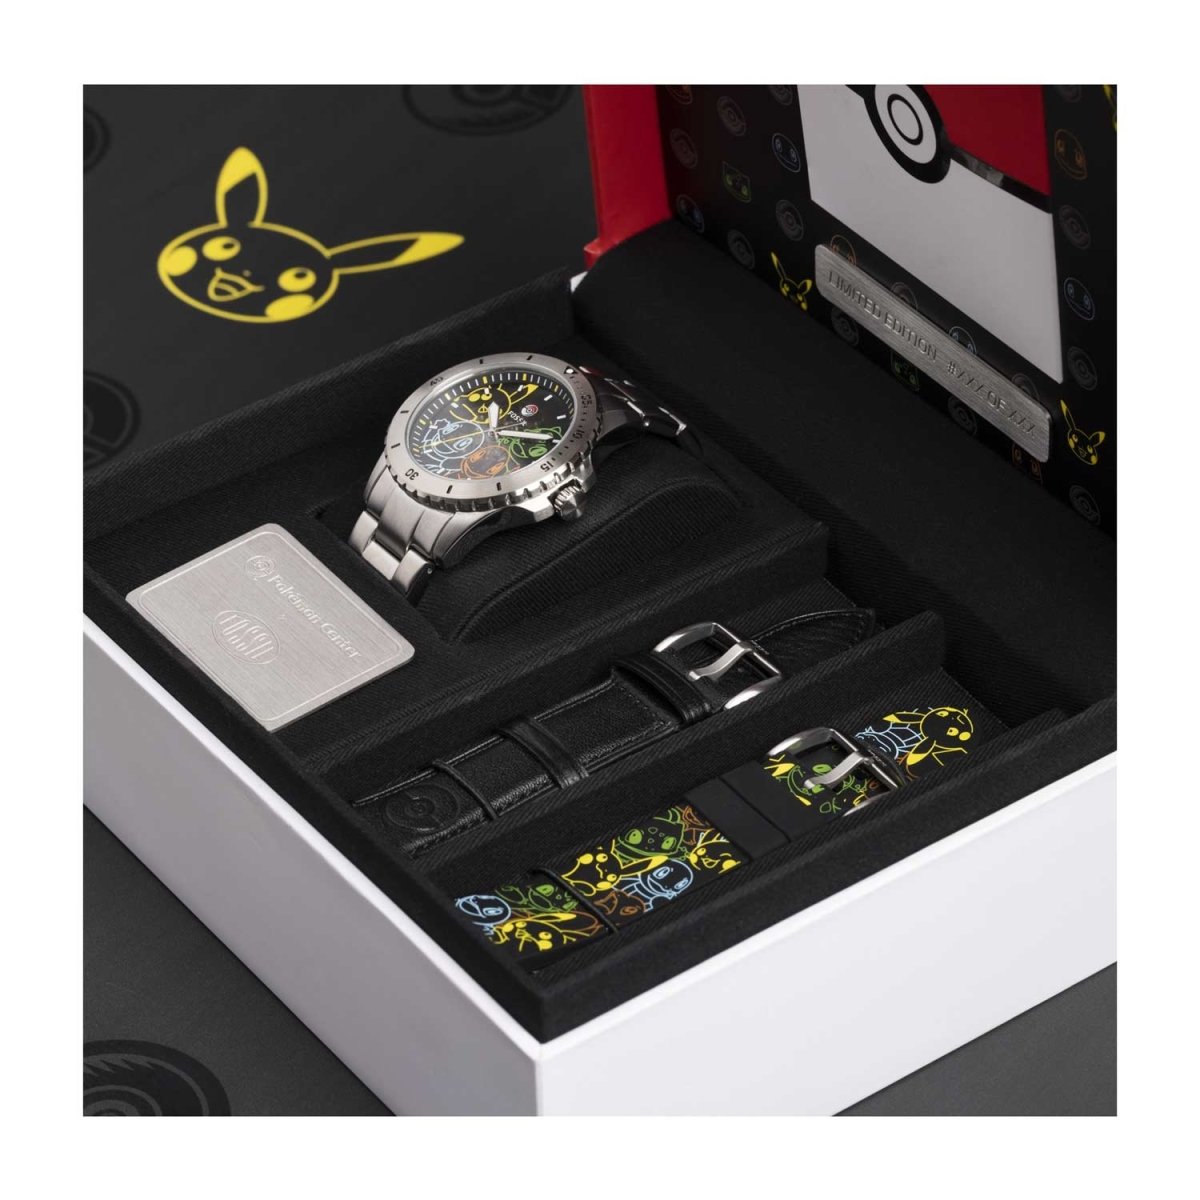 Pokémon Center × Fossil: Kanto First Partners Rose Gold Stainless Steel  Watch Box Set (One Size)